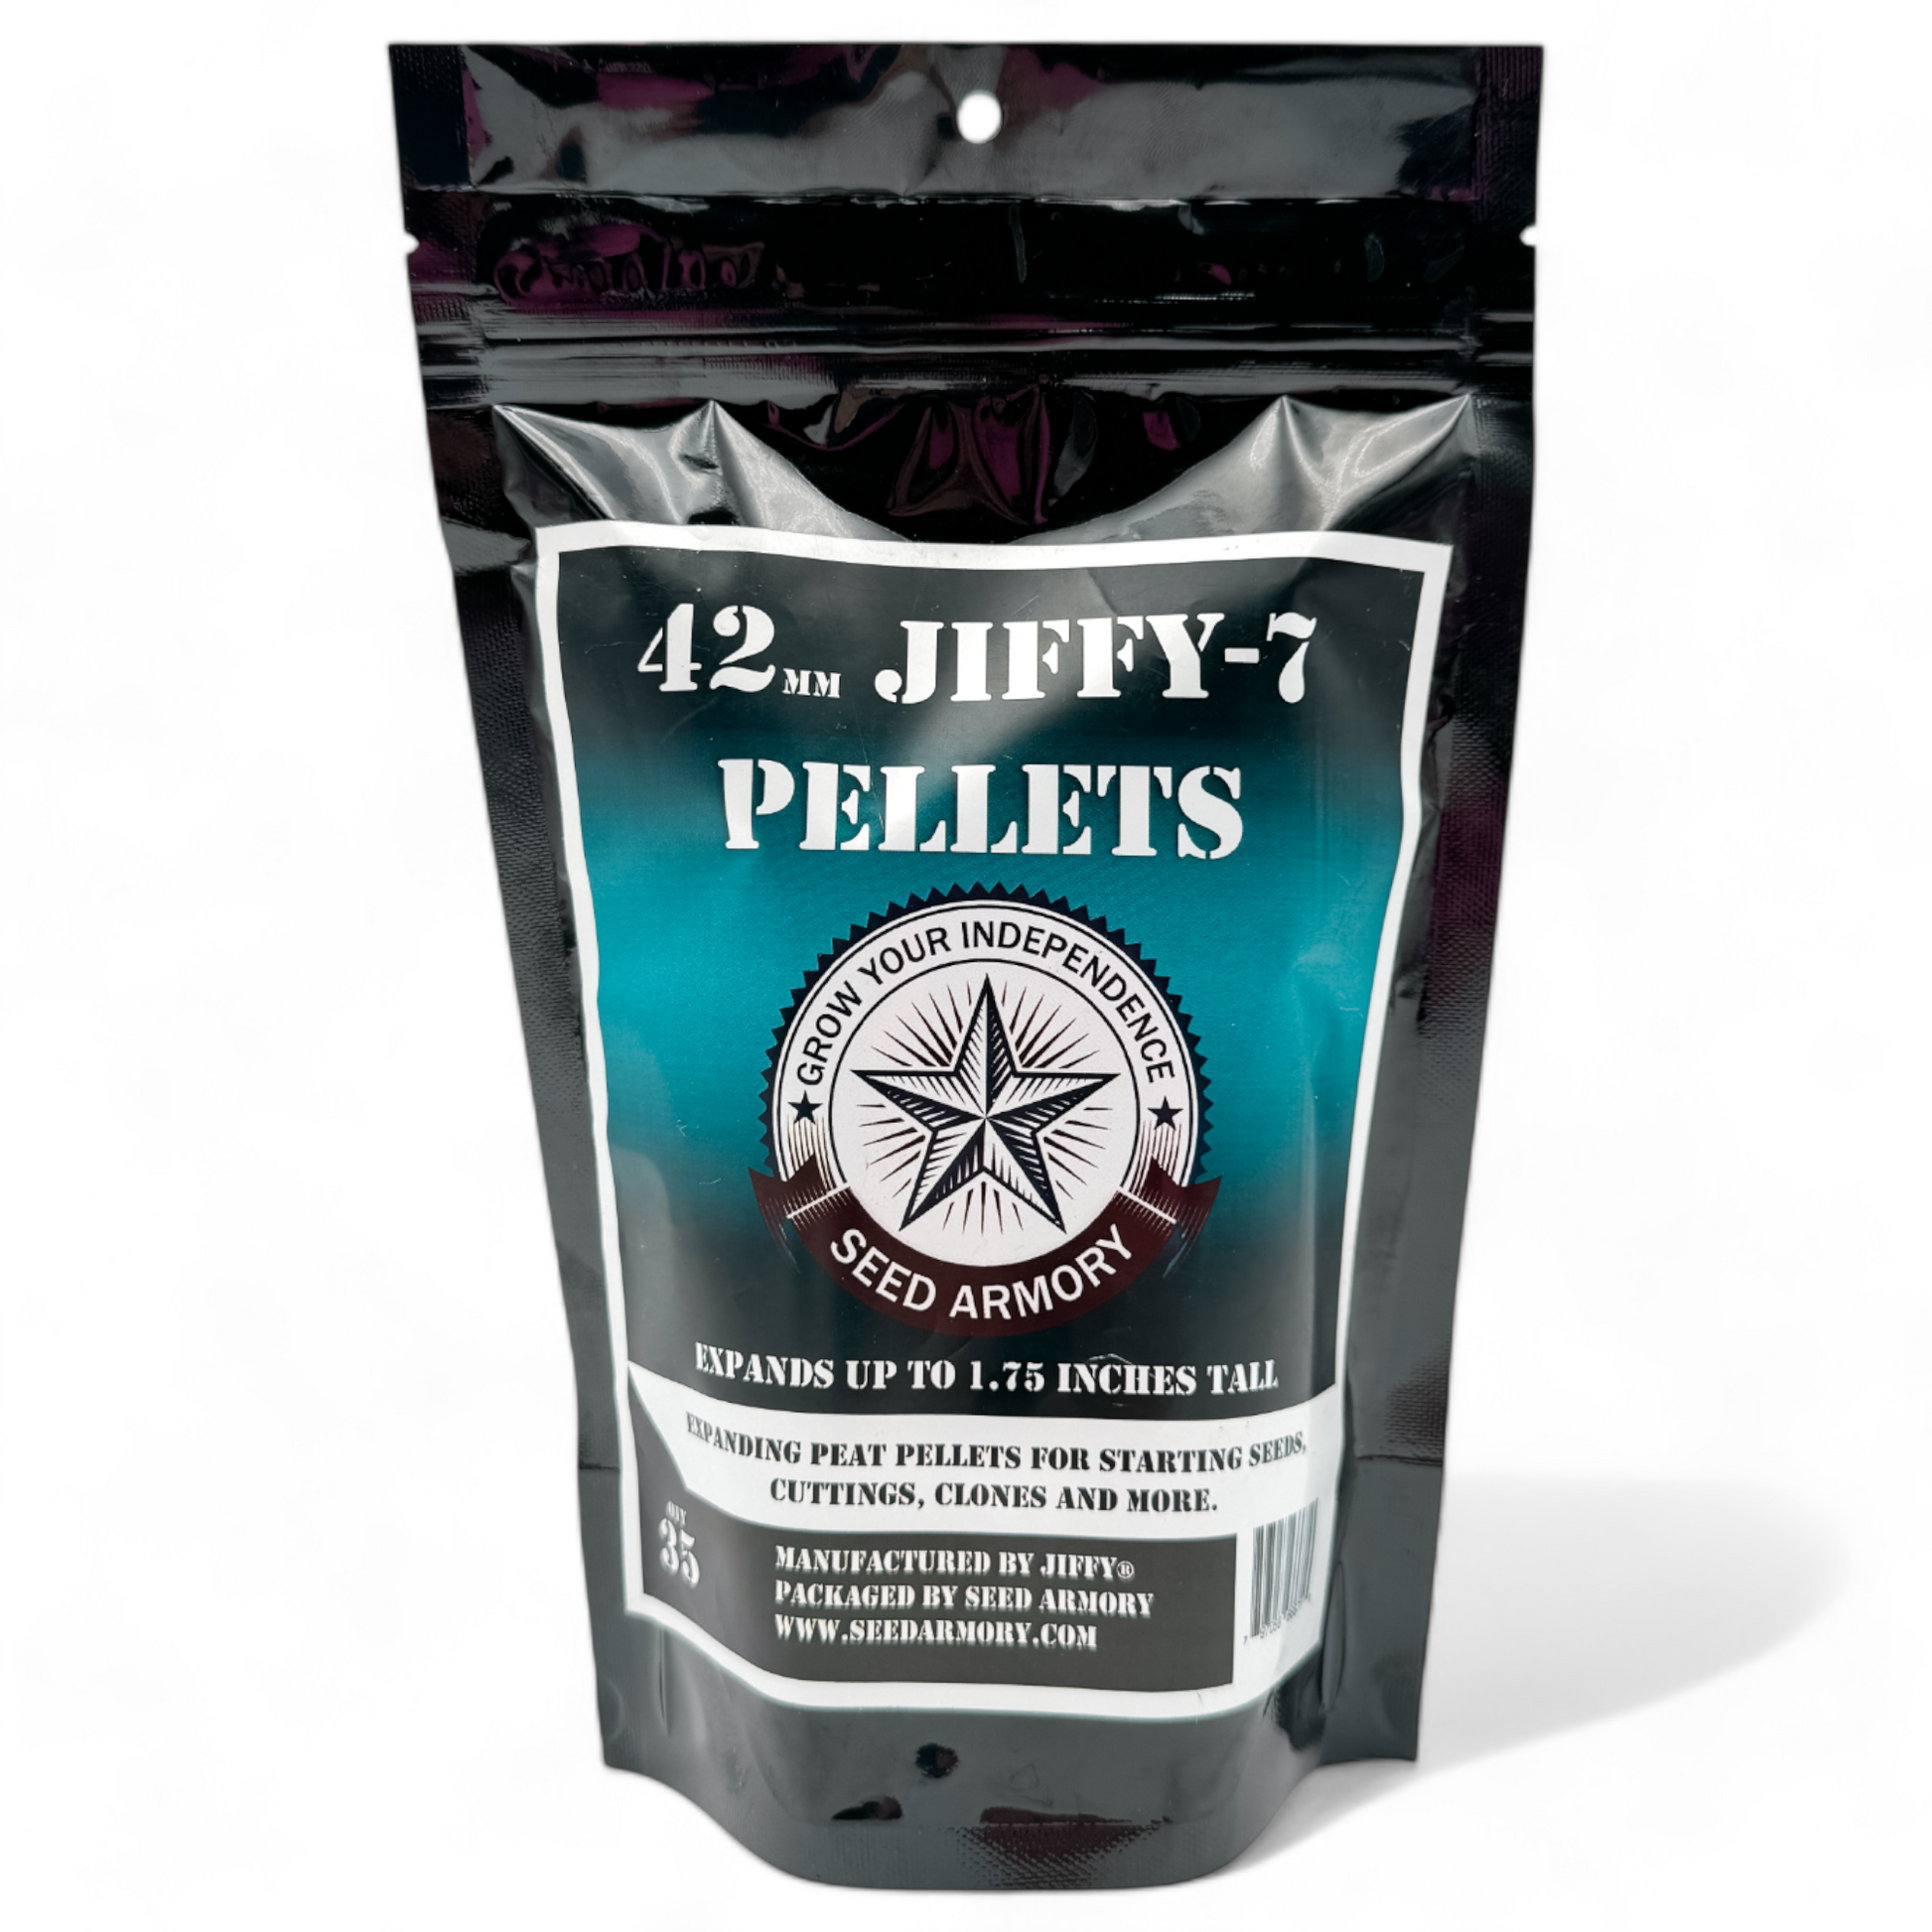 Green Thumb Power Pack Jerry 7 42mm package with nutrient-rich pellets for plants